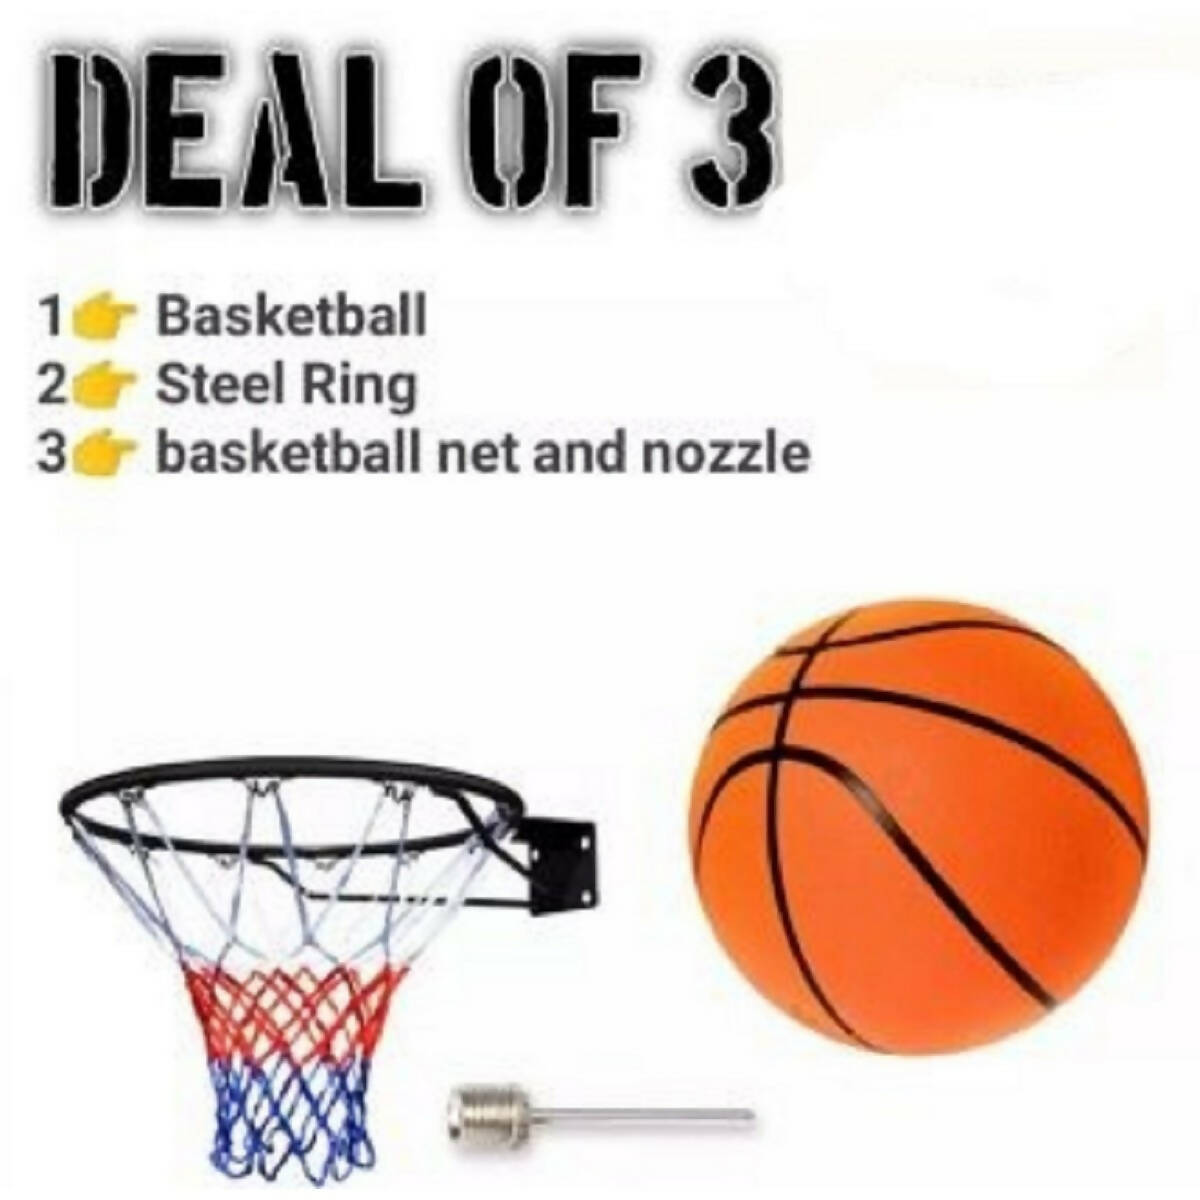 Basket Ball With free Net and steal ring